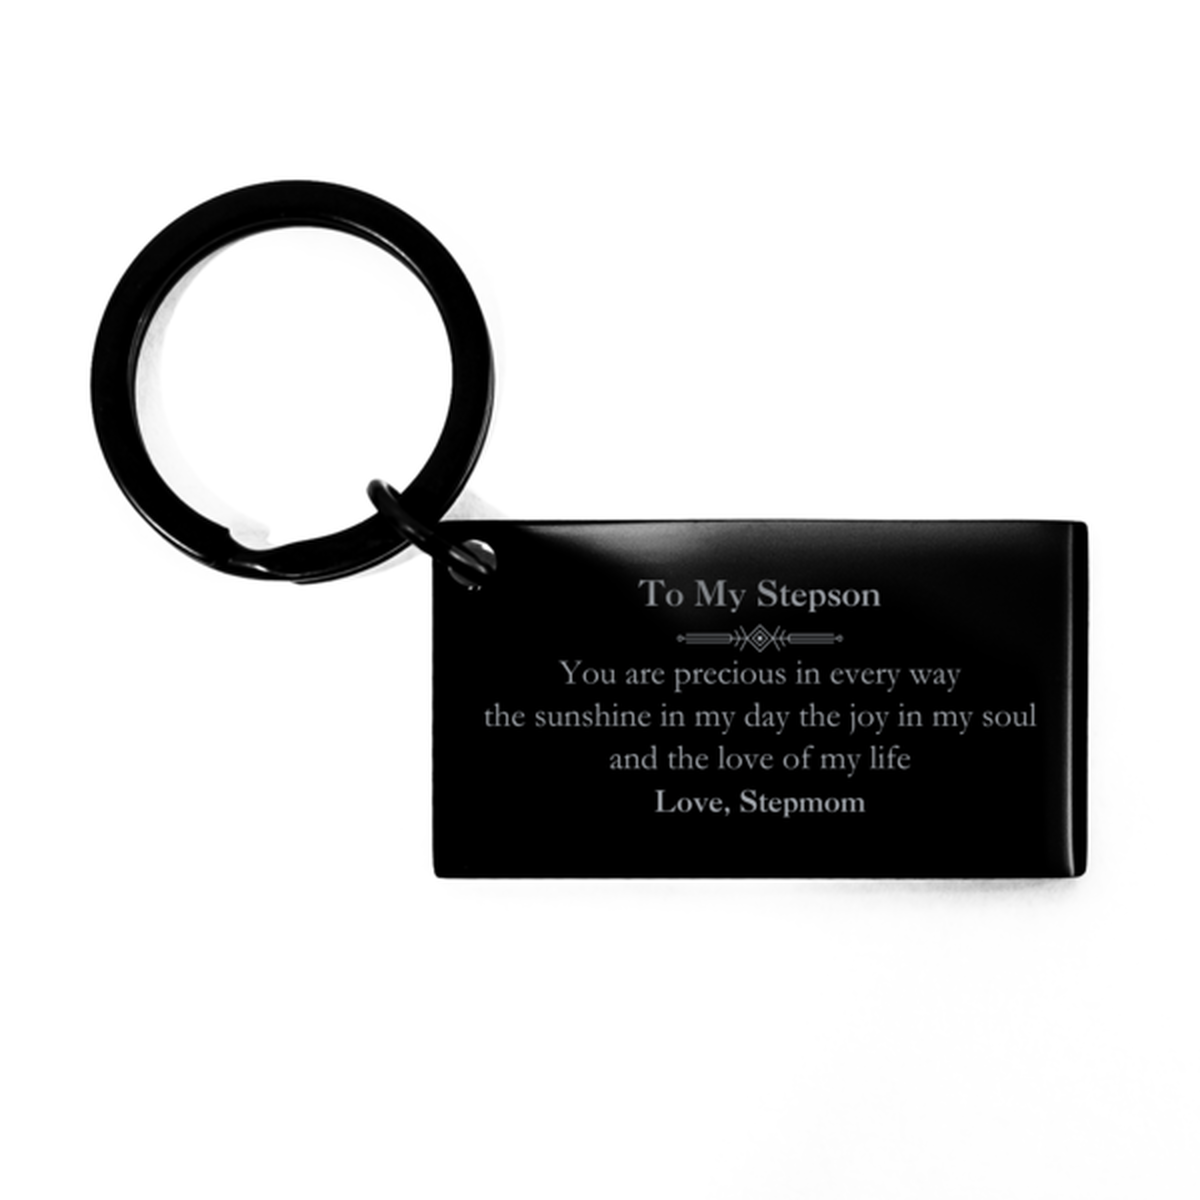 Graduation Gifts for Stepson Keychain Present from Stepmom, Christmas Stepson Birthday Gifts Stepson You are precious in every way the sunshine in my day. Love, Stepmom